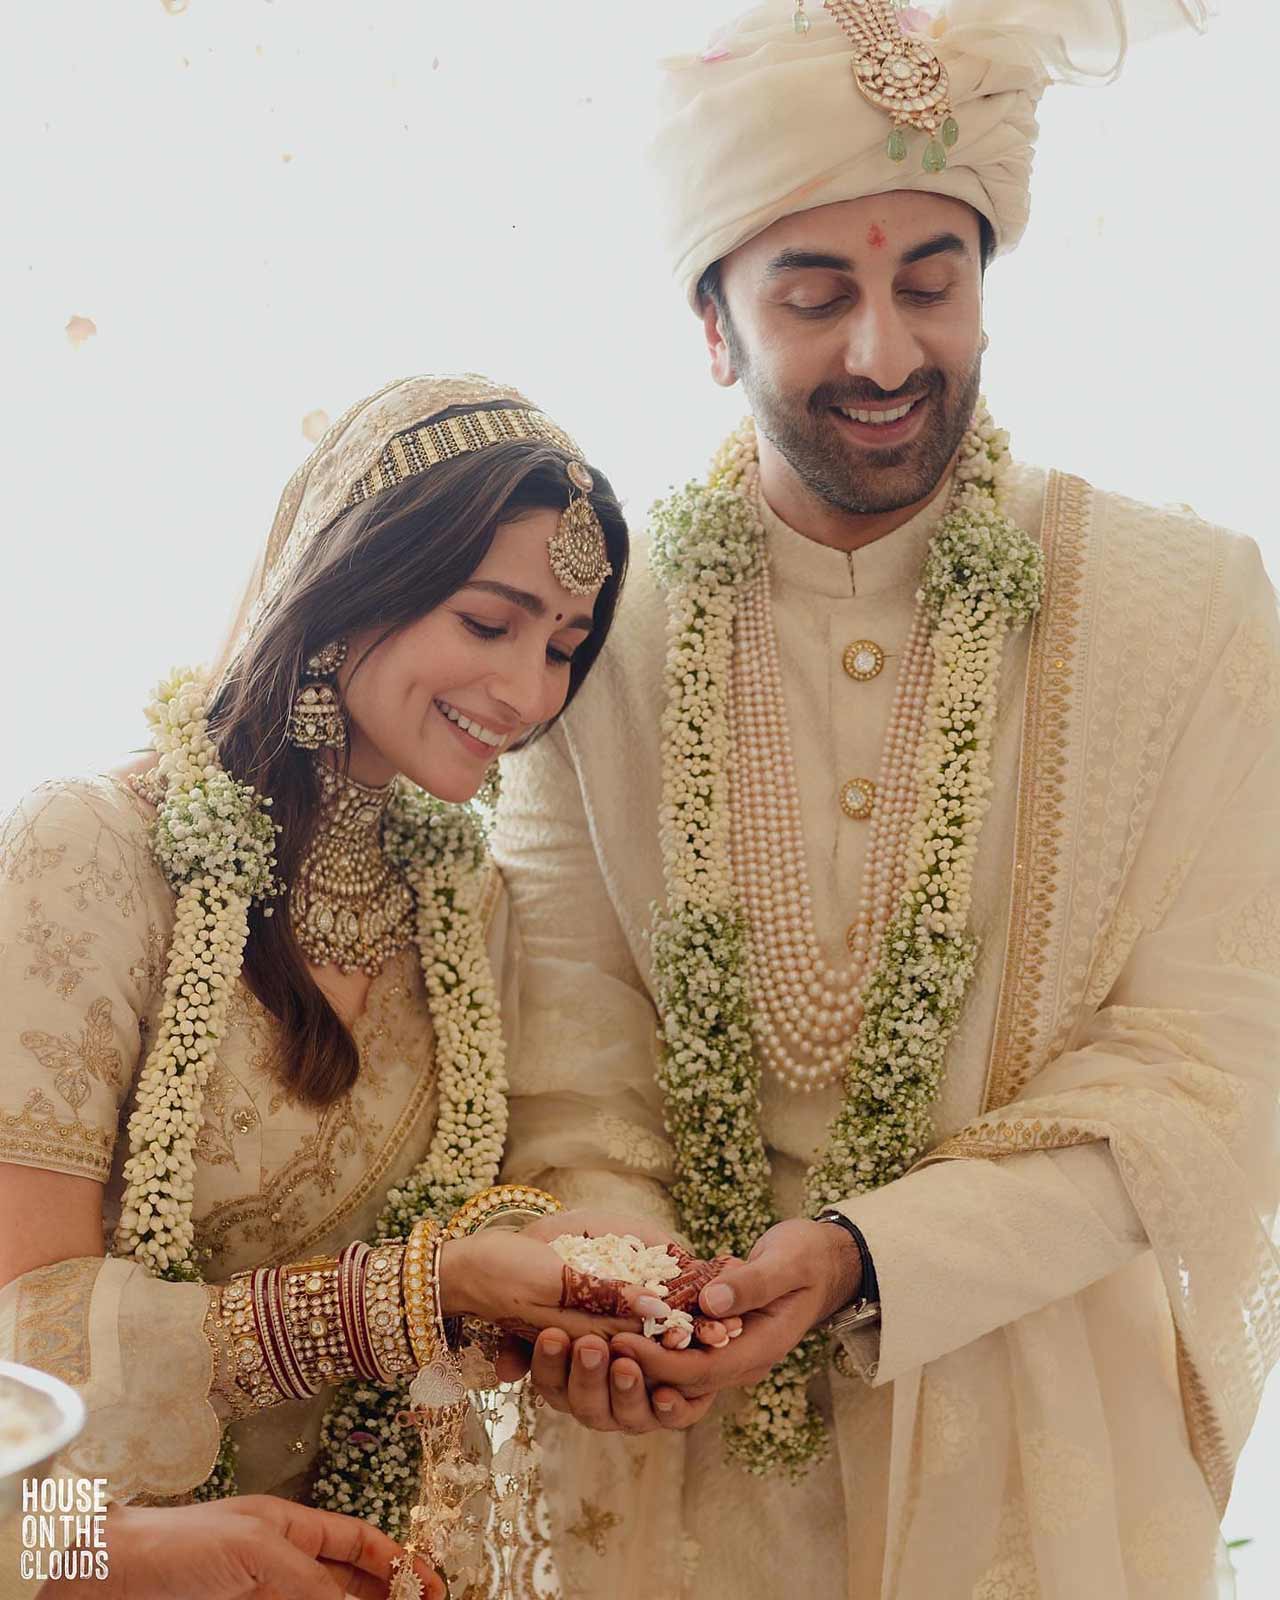 Ranbir Kapoor and Alia Bhatt began dating on the sets of Ayan Mukherjee's 'Brahmastra' in 2018 and made their first public appearance as a couple at Sonam Kapoor's wedding in the same year.